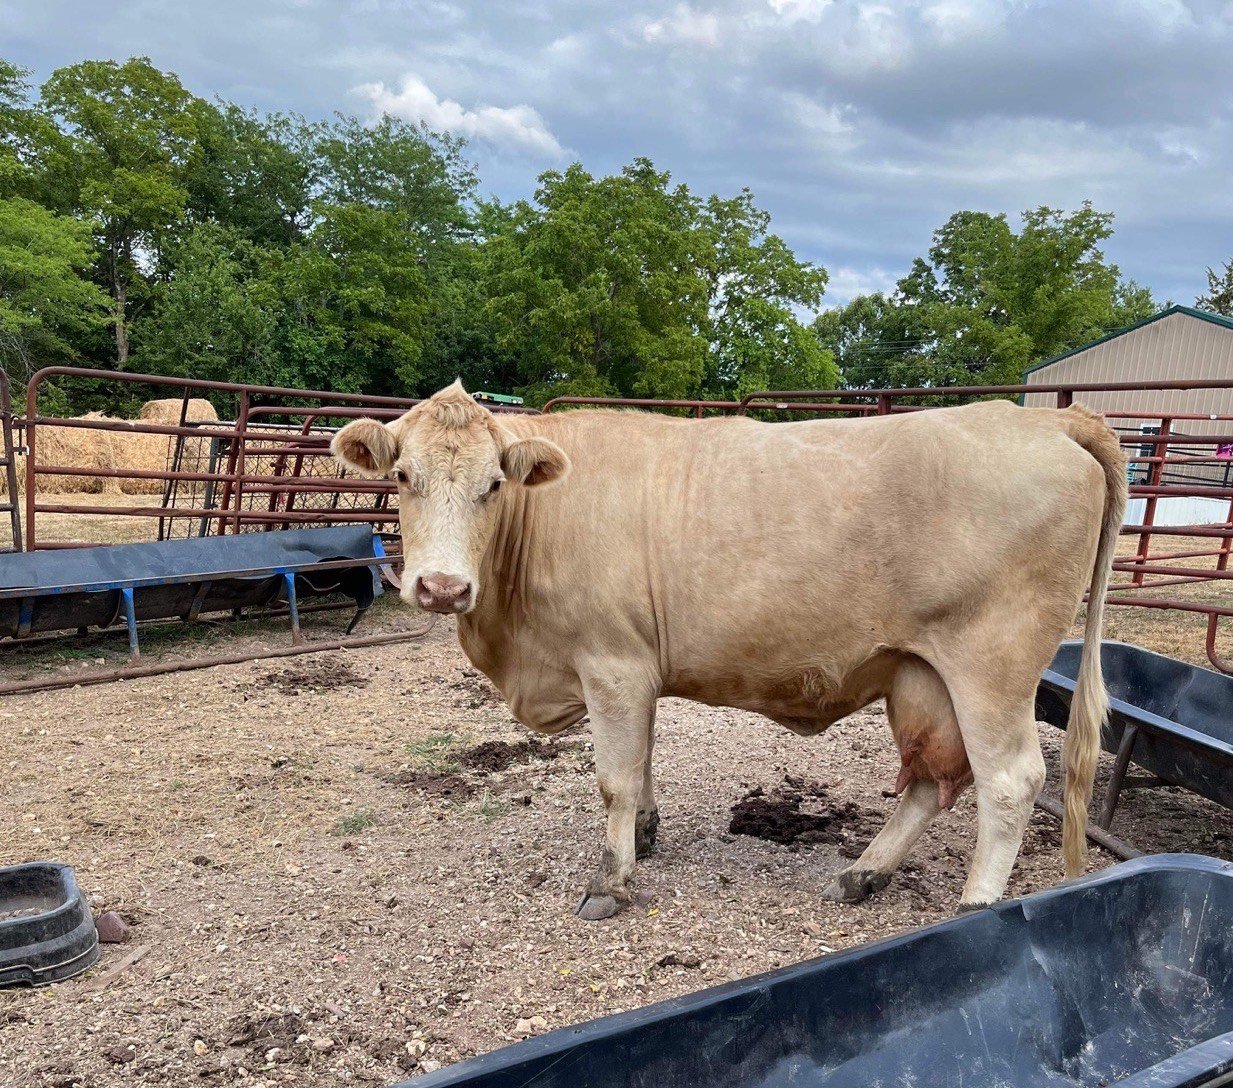 Bohannon and Ricks encourage community members to reach out to a local farmer to purchase a beef. Cutting out the middle man puts more money back into the farmers pocket and lets the consumer know exactly where their beef came from.